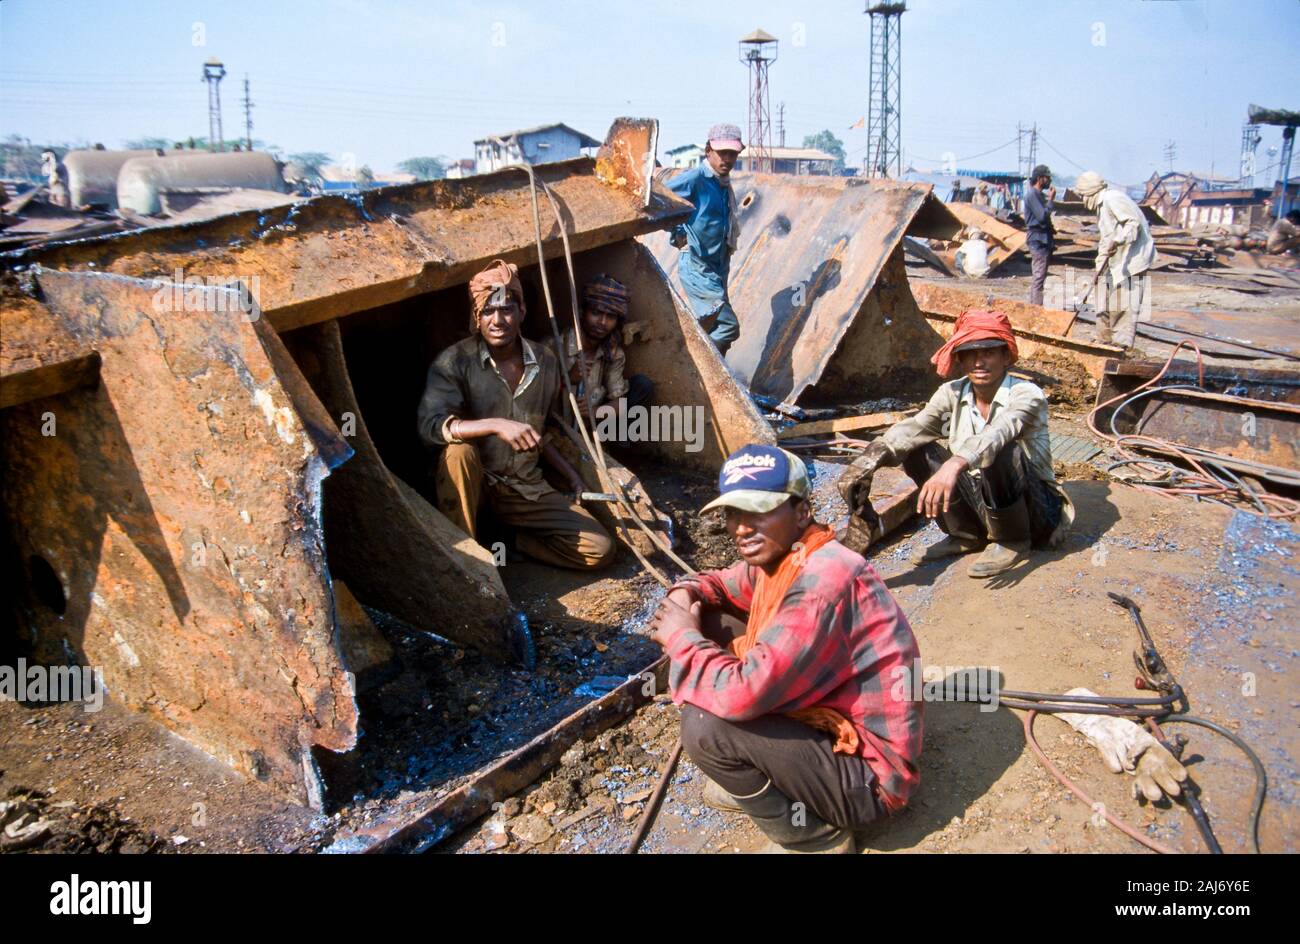 Alang is the largest shipbreaking place on earth. Labour from the poor areas of India work under horrible conditions. Stock Photo